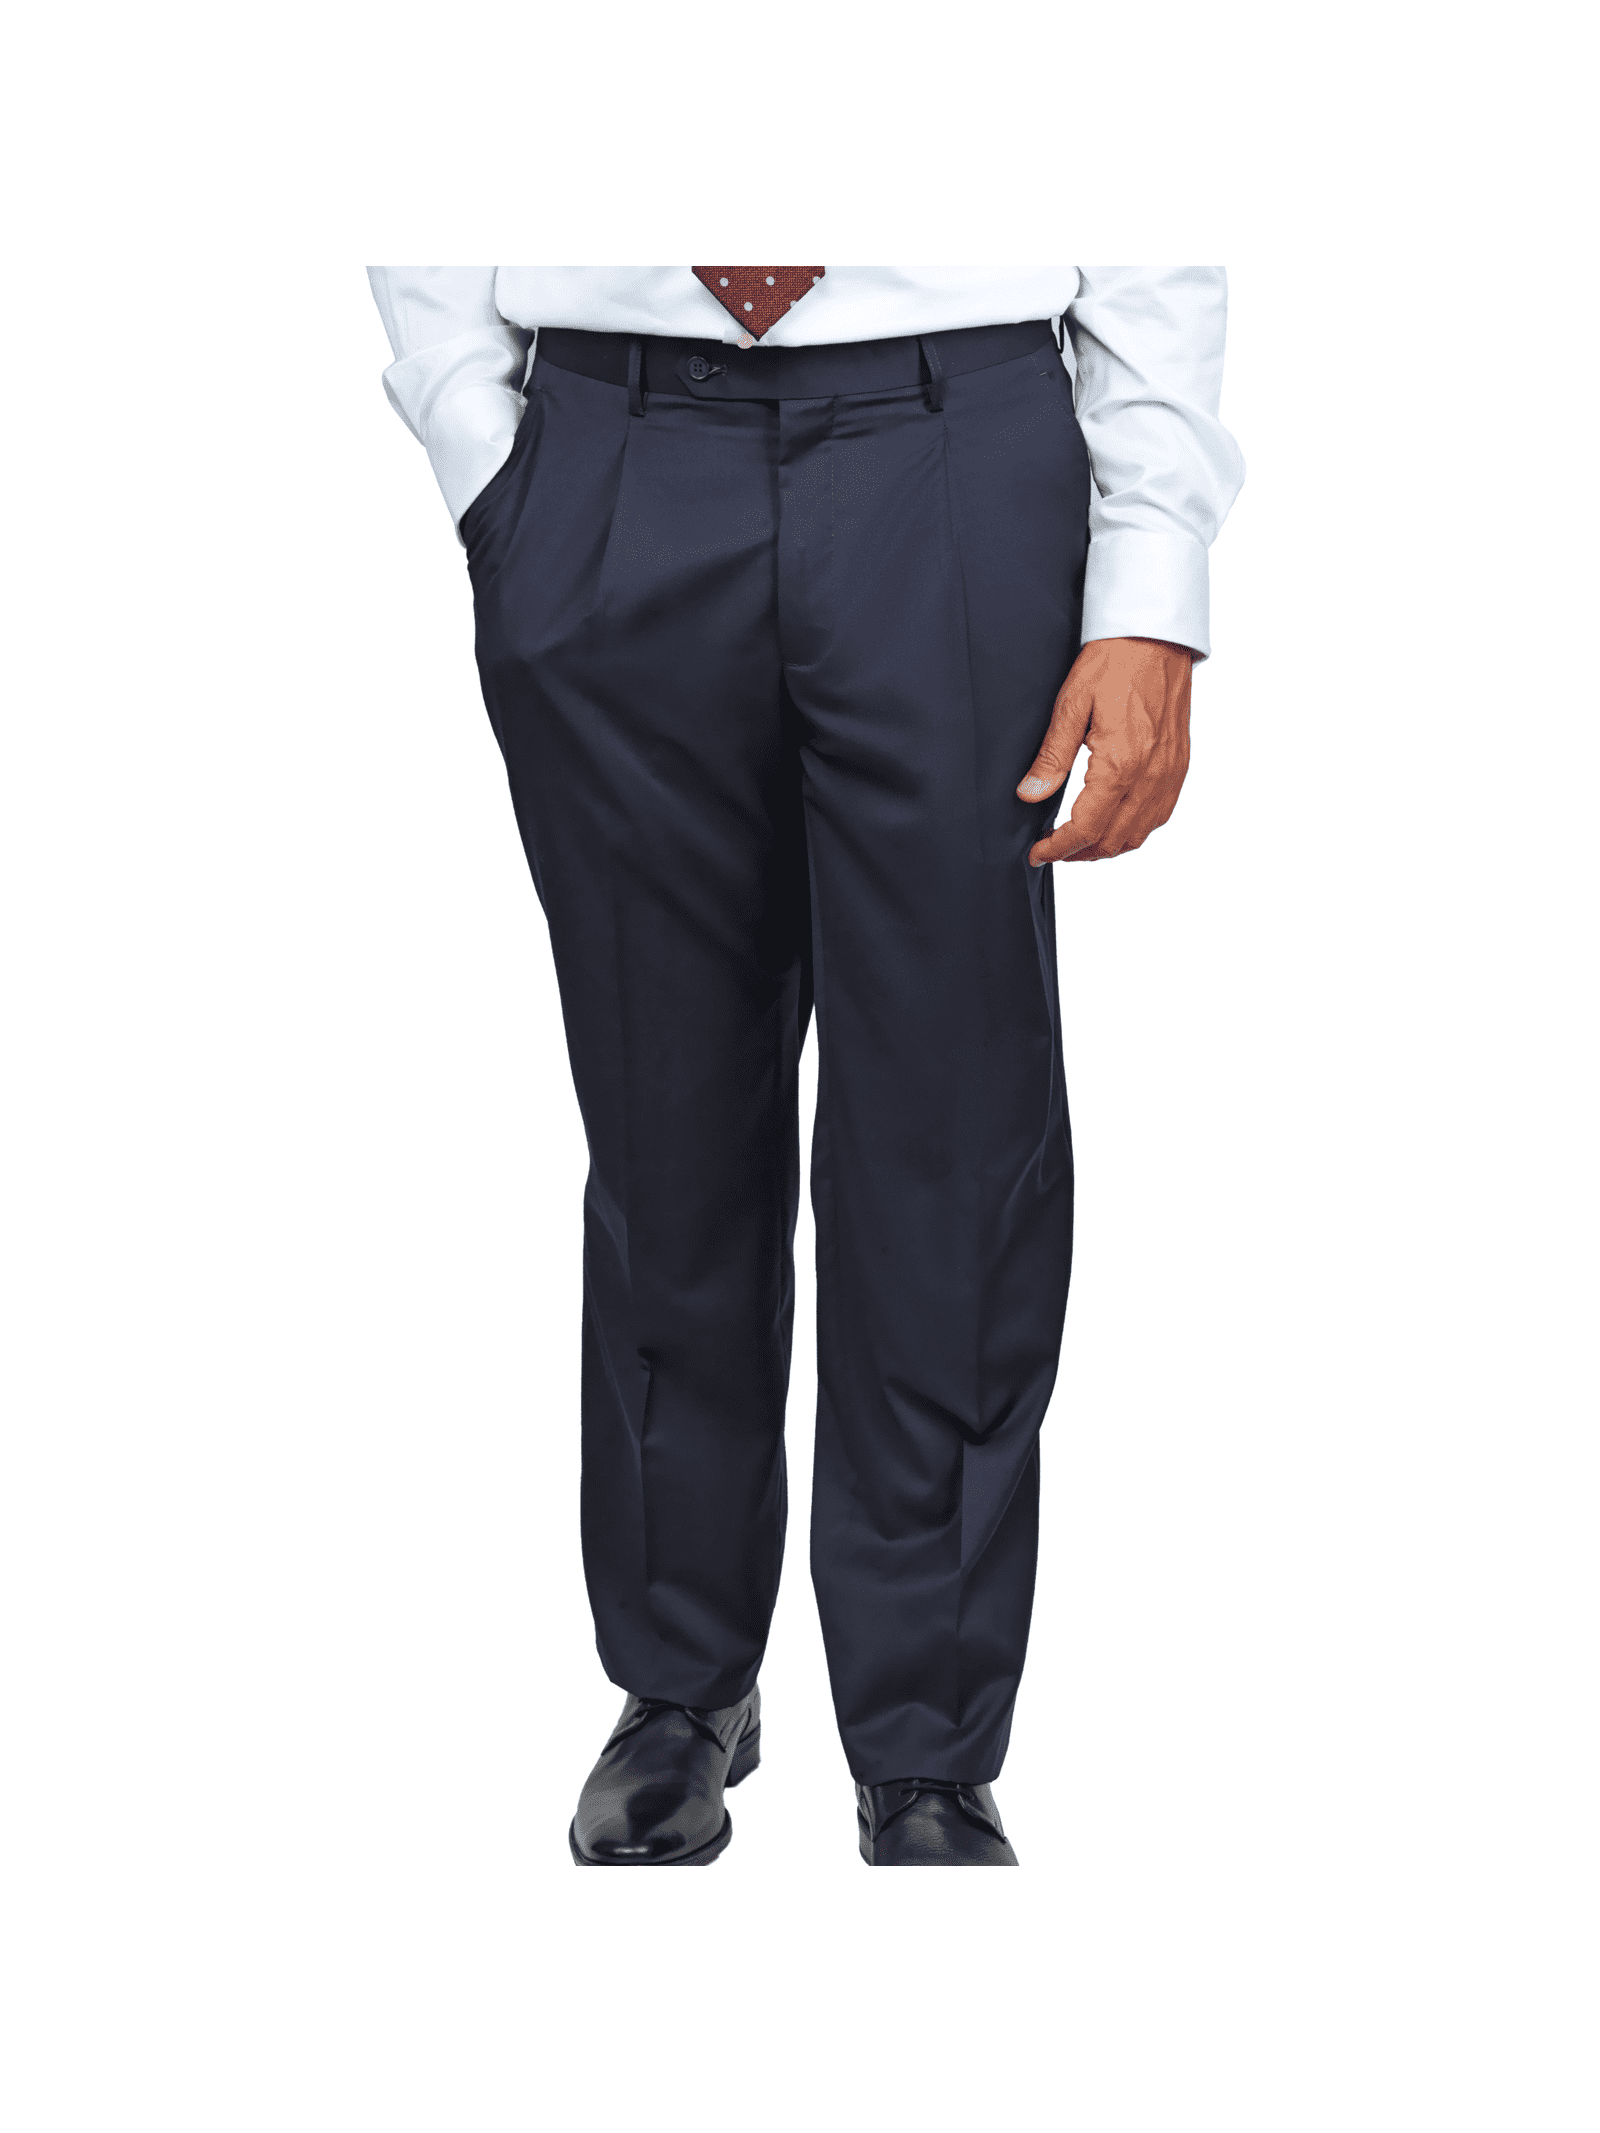 Buy Blue Formal Trousers Online in India at Best Price - Westside